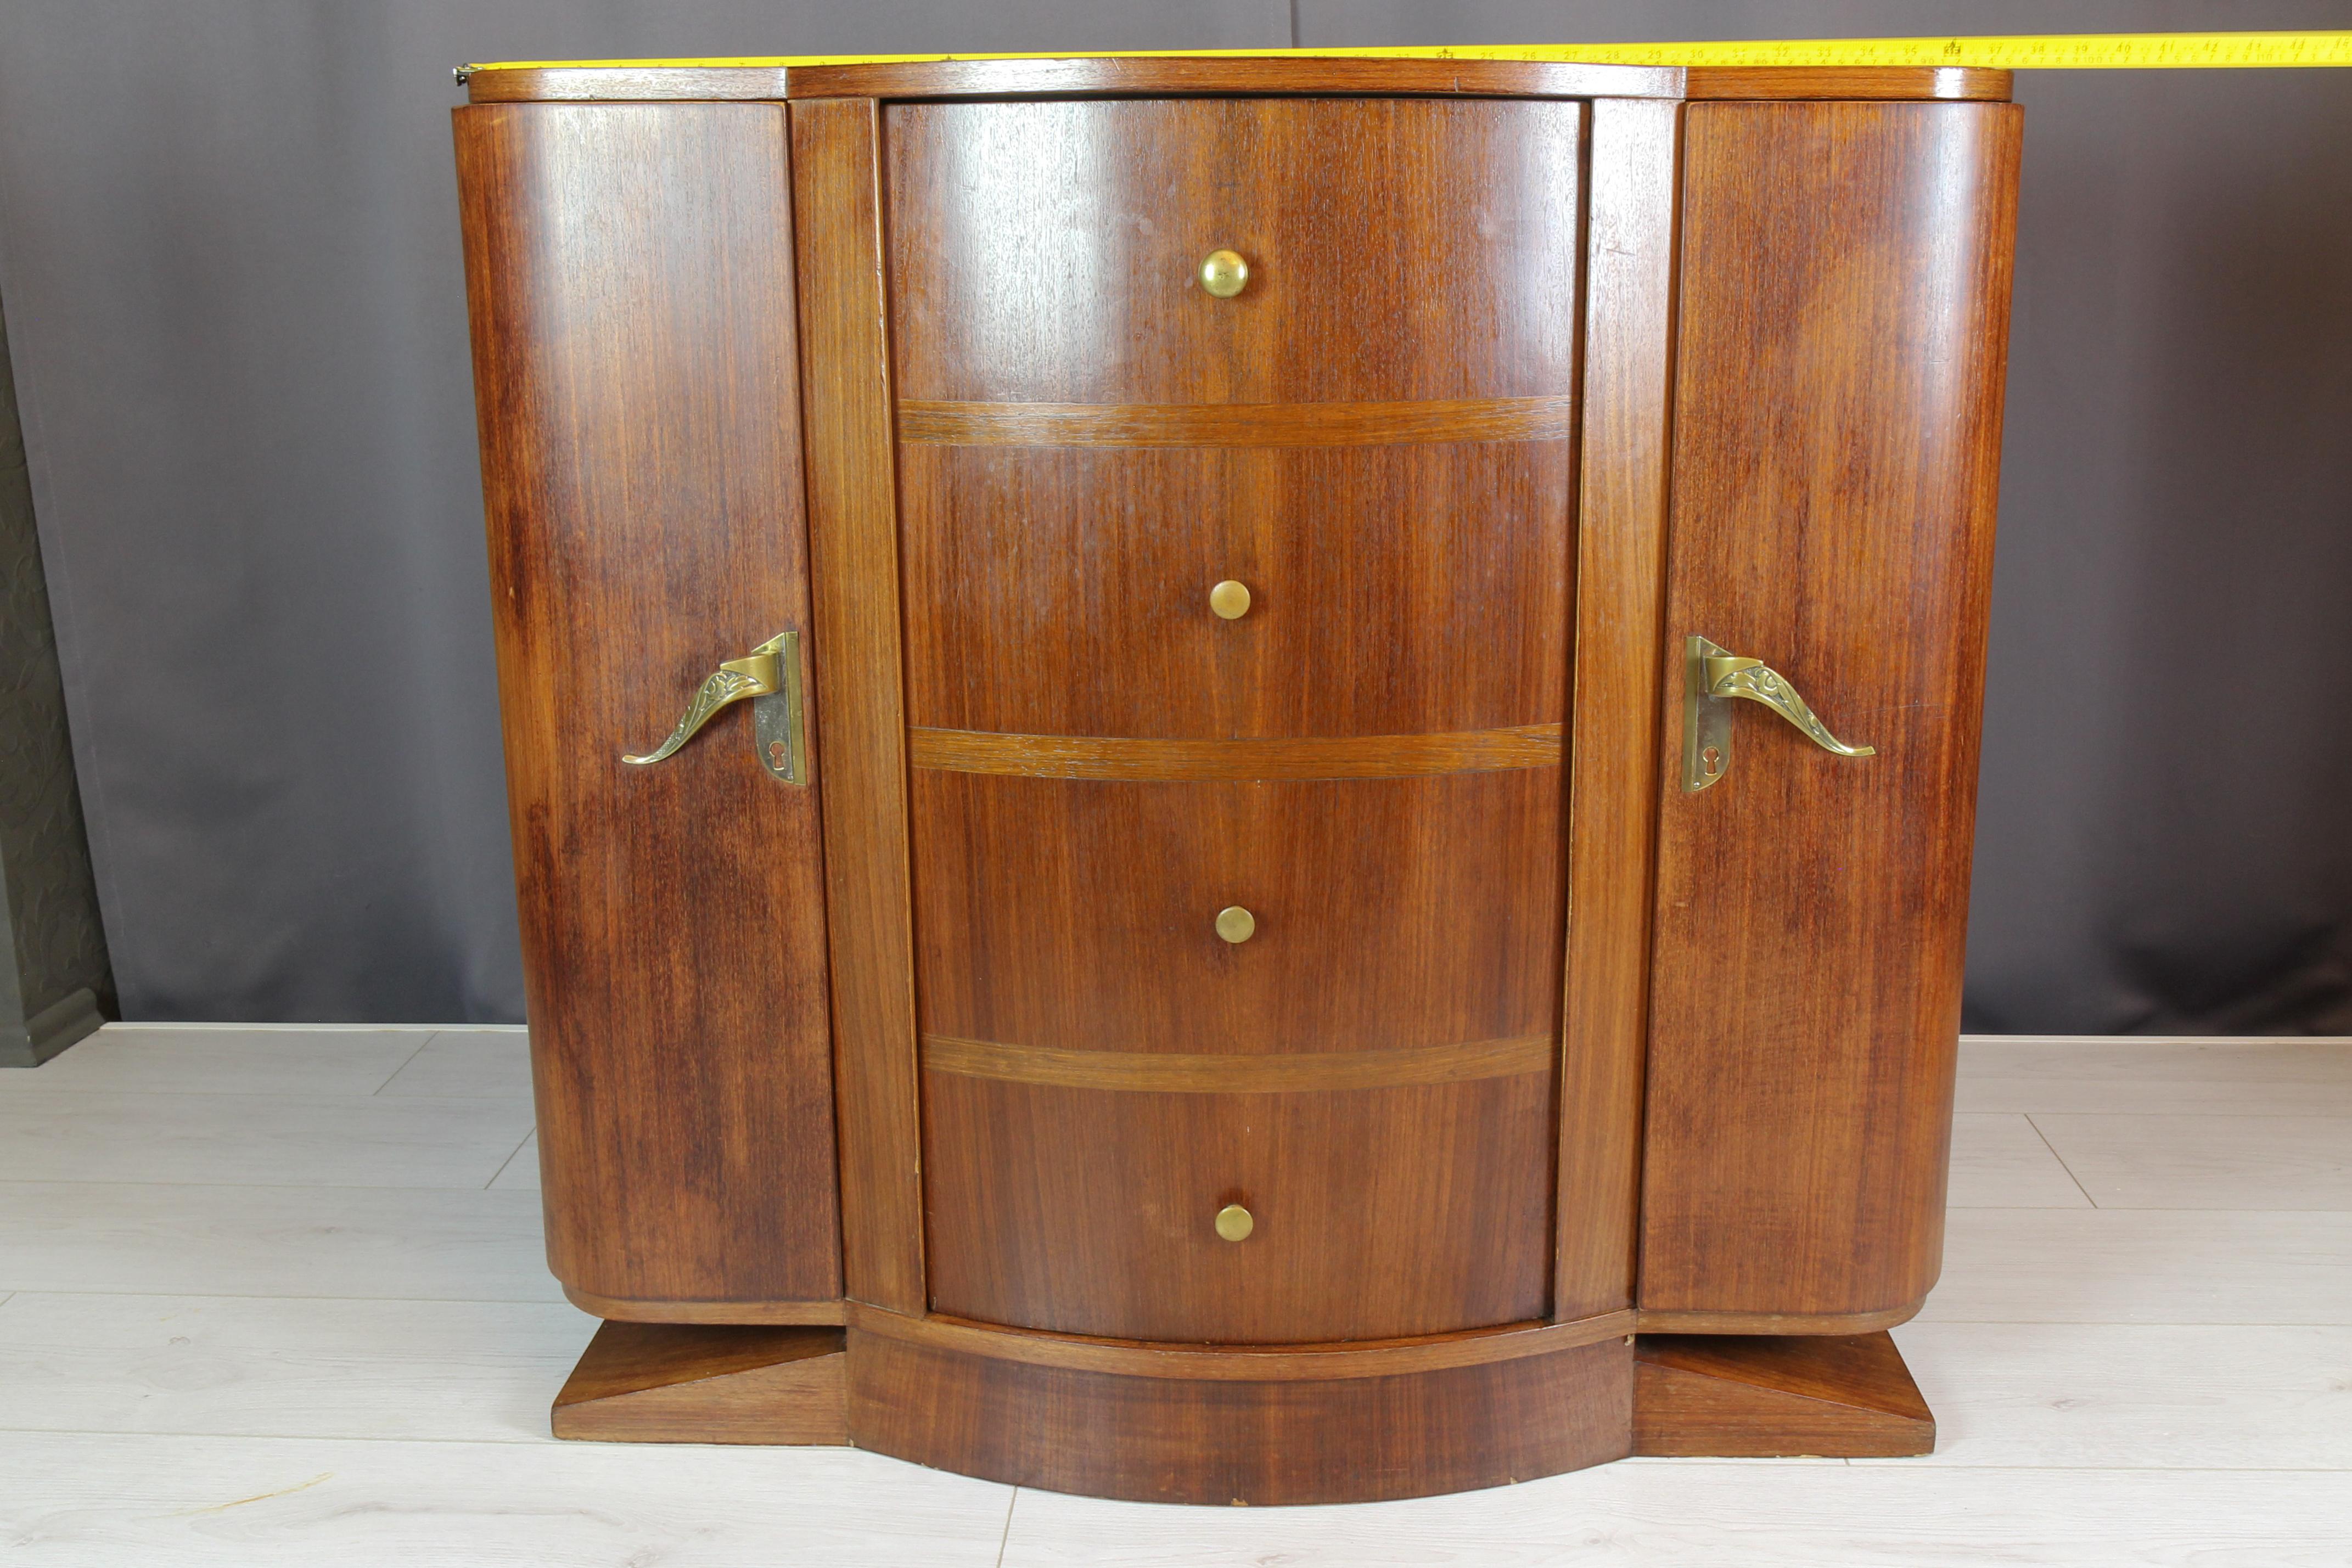 French Art Deco Sideboard with Radio and Record Player, 1930s For Sale 10